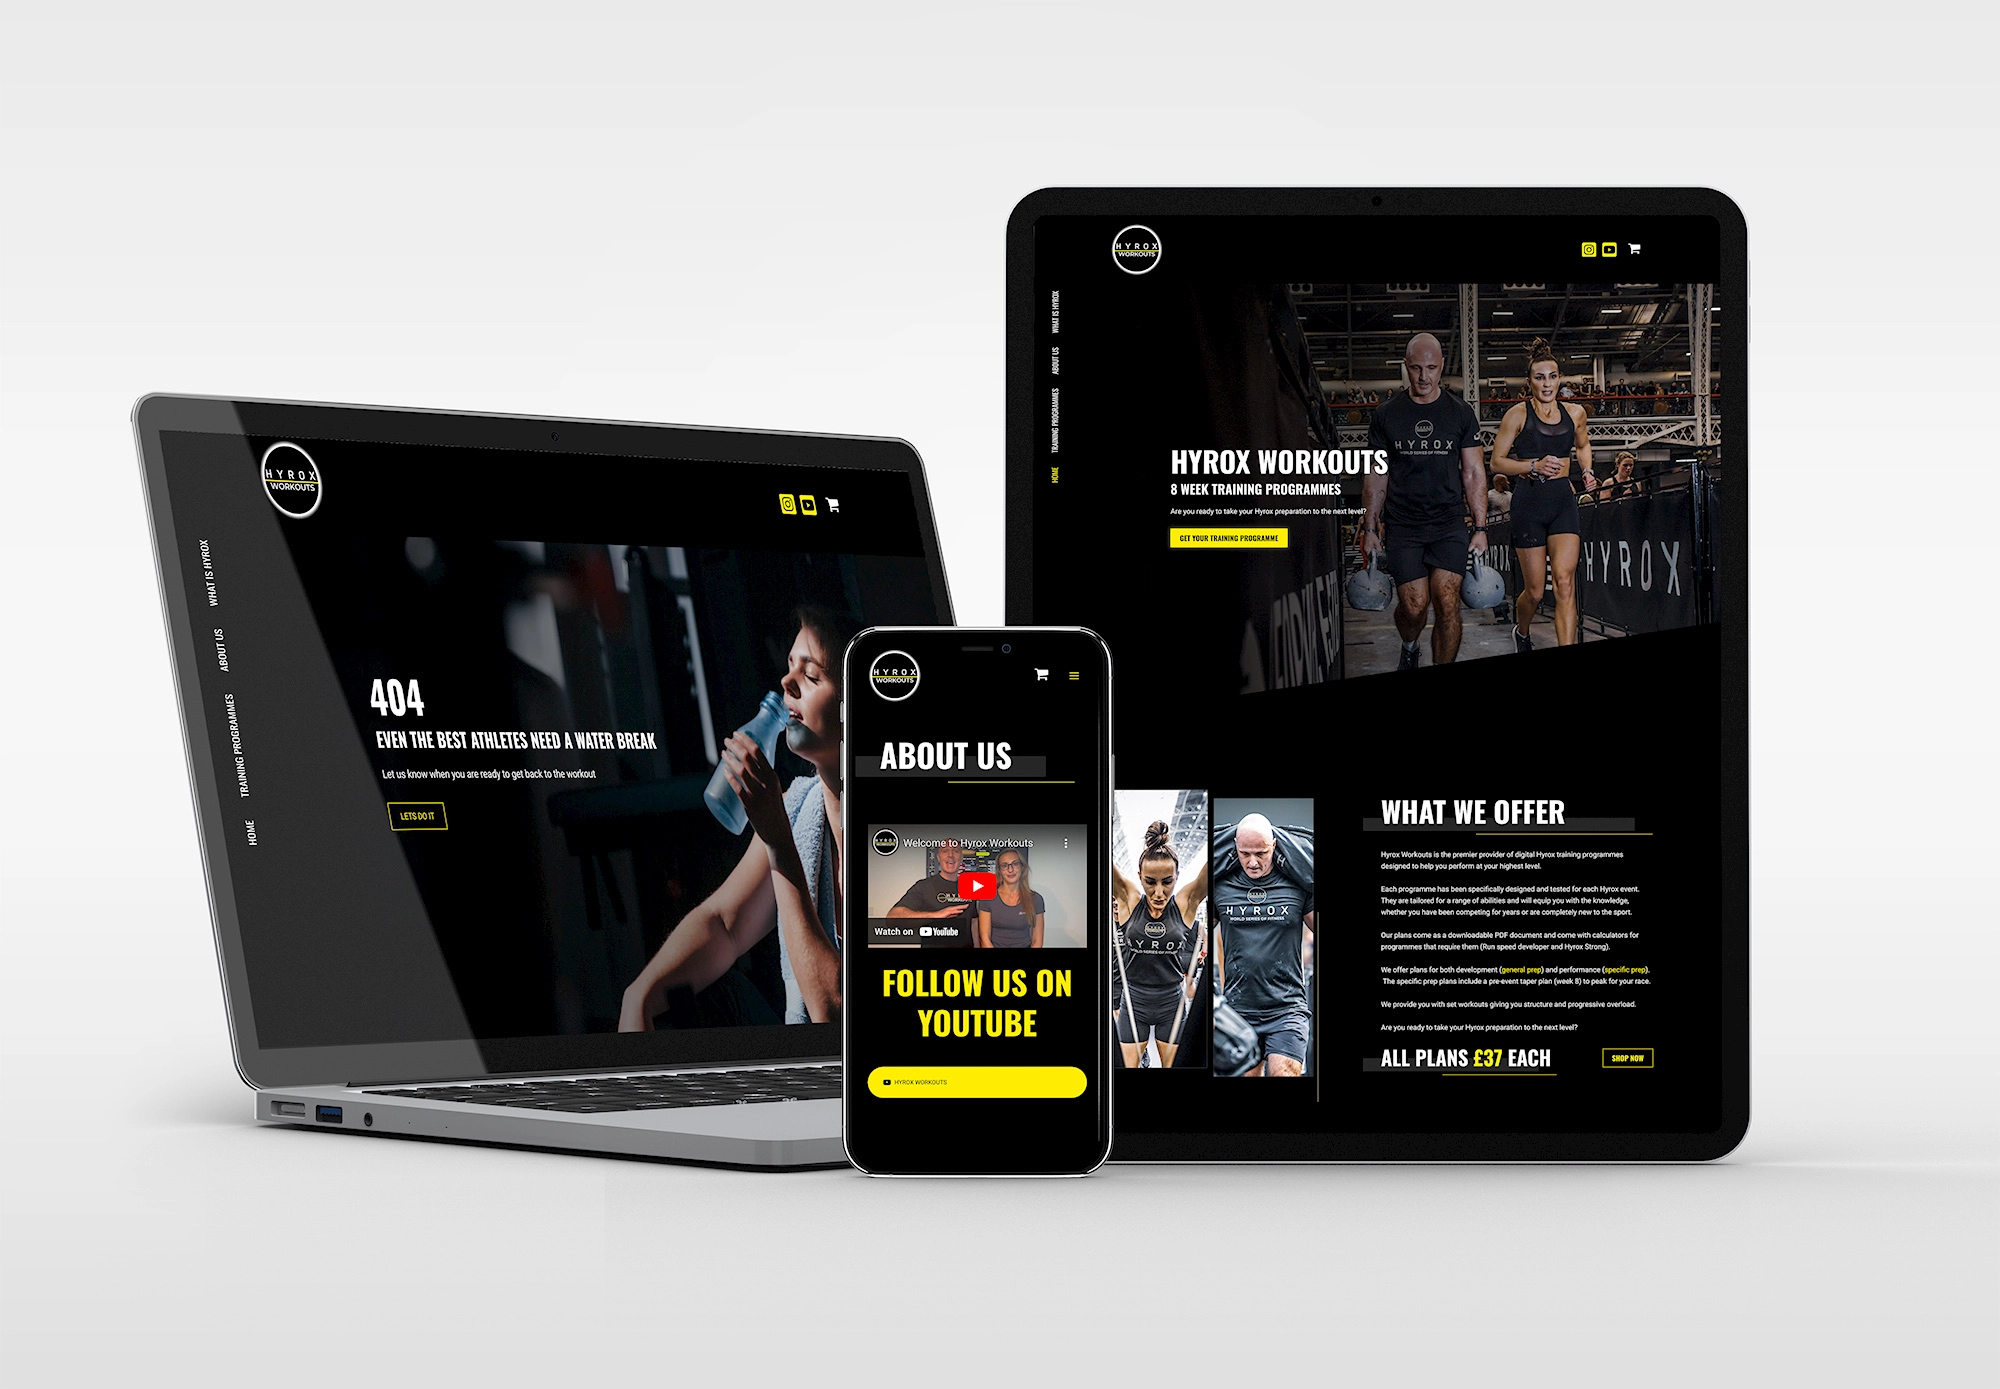 Mockup of Hyrox Workouts website on a laptop, tablet and mobile phone